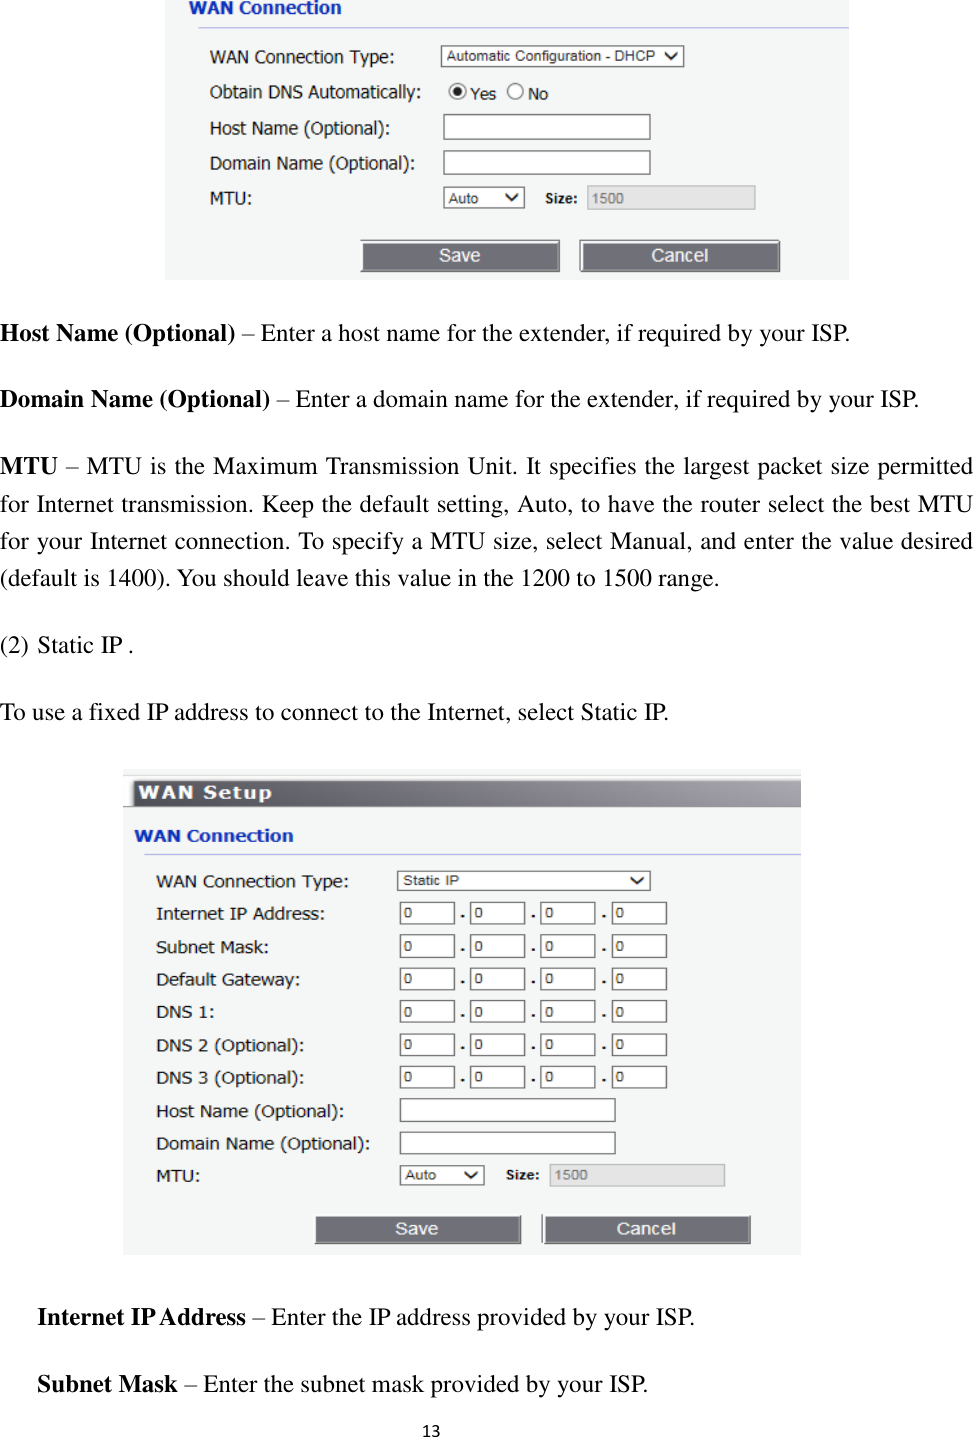                                                               13                                                      Host Name (Optional) – Enter a host name for the extender, if required by your ISP. Domain Name (Optional) – Enter a domain name for the extender, if required by your ISP. MTU – MTU is the Maximum Transmission Unit. It specifies the largest packet size permitted for Internet transmission. Keep the default setting, Auto, to have the router select the best MTU for your Internet connection. To specify a MTU size, select Manual, and enter the value desired (default is 1400). You should leave this value in the 1200 to 1500 range. (2) Static IP . To use a fixed IP address to connect to the Internet, select Static IP.  Internet IP Address – Enter the IP address provided by your ISP. Subnet Mask – Enter the subnet mask provided by your ISP. 